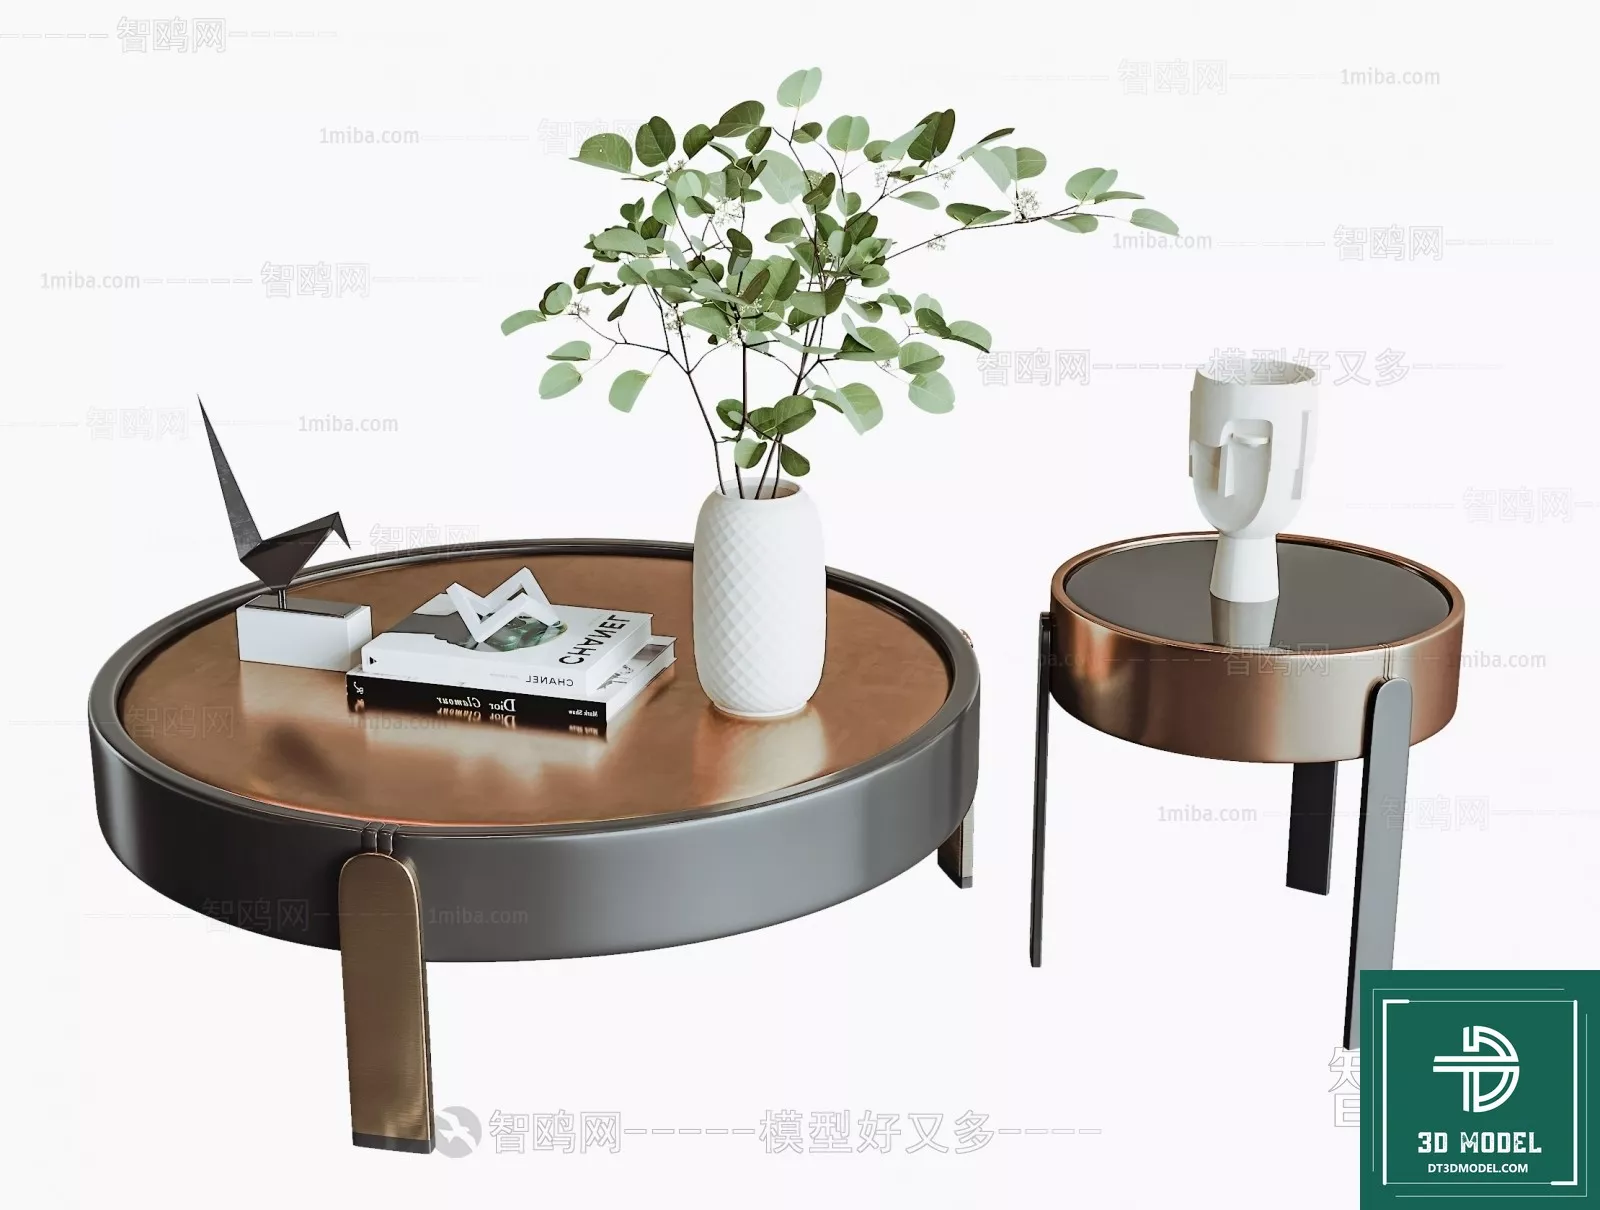 MODERN TEA TABLE - SKETCHUP 3D MODEL - VRAY OR ENSCAPE - ID14947